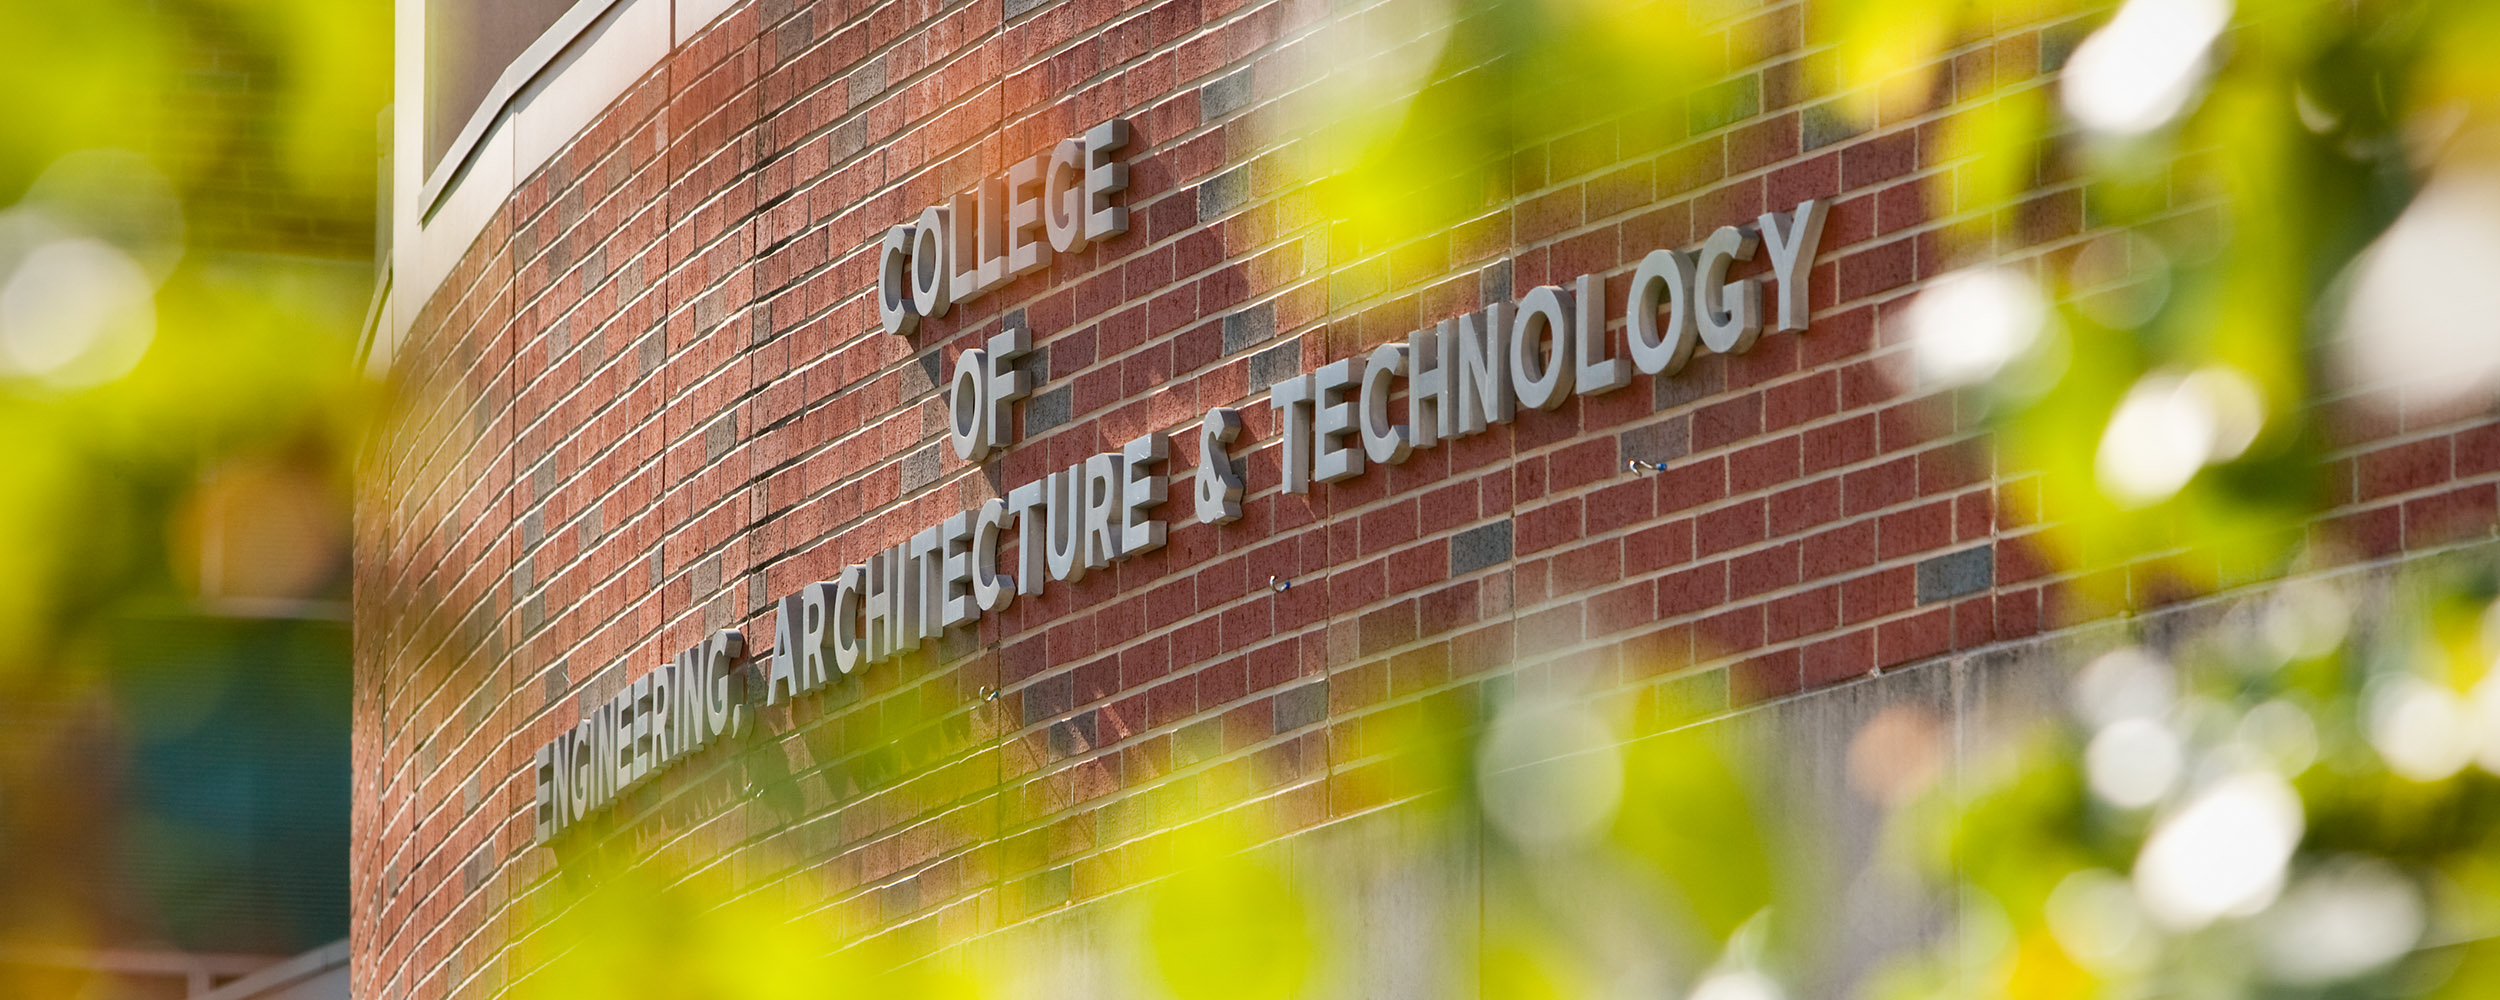 The College of Engineering, Architecture and Technology